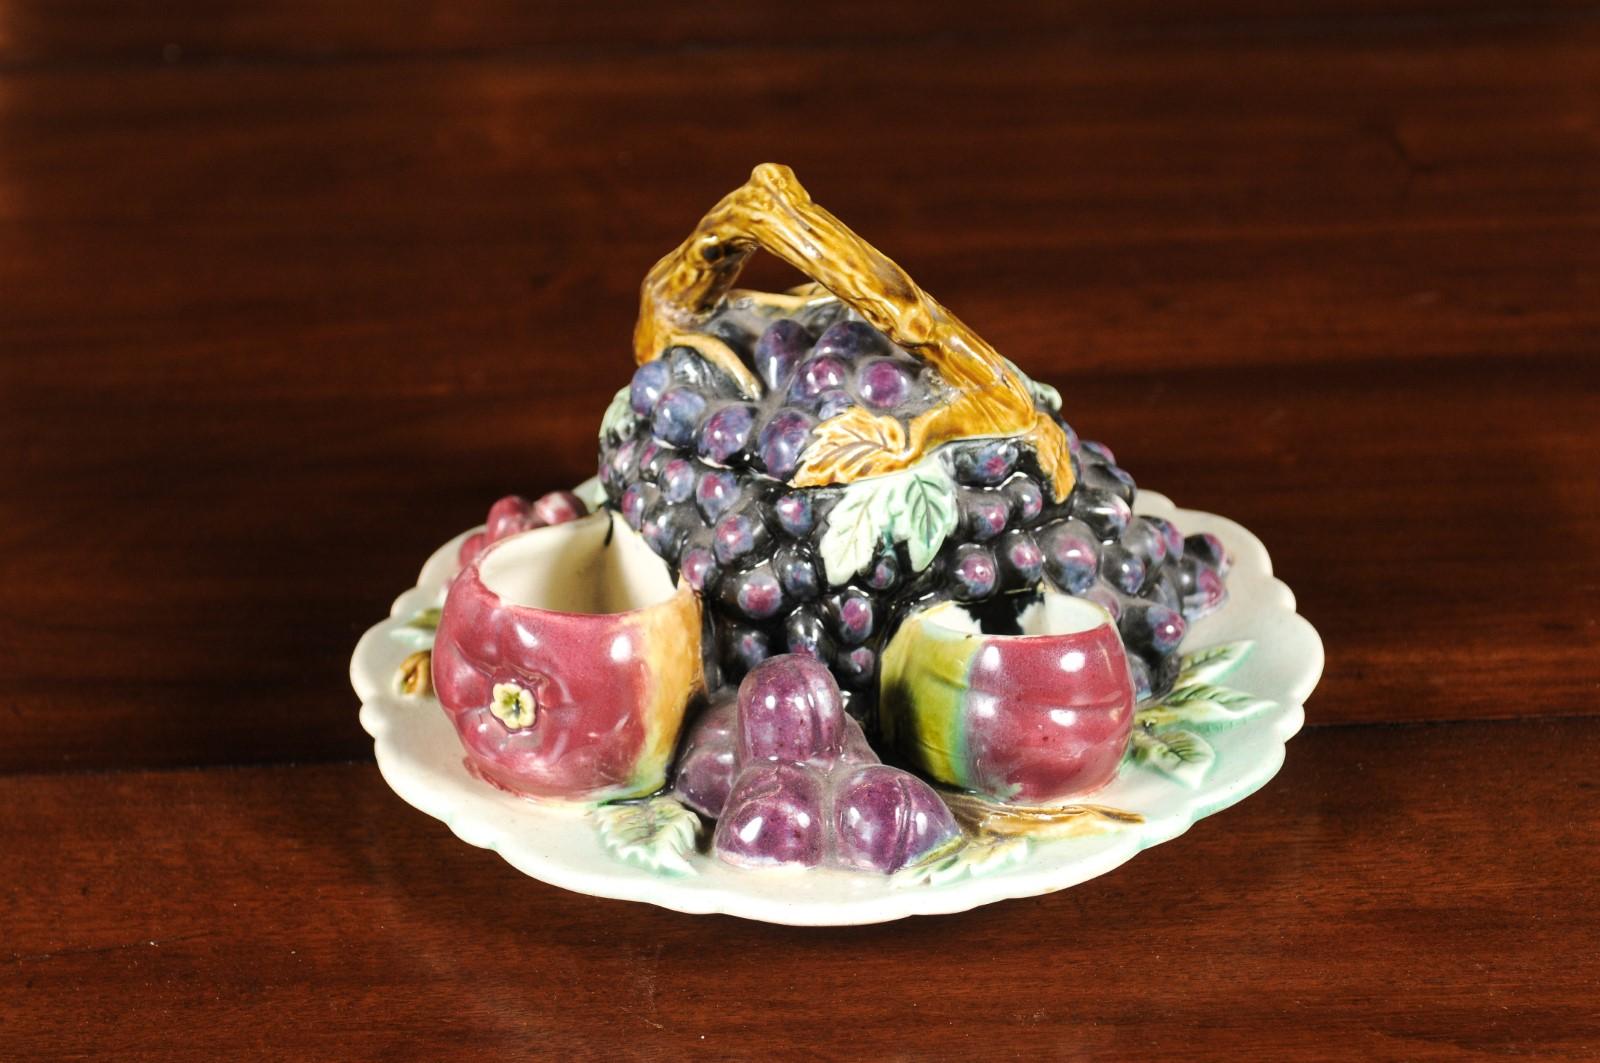 A French Majolica fruit dish from the 19th century with lid. Born in France during the politically dynamic 19th century, this dish attracts our attention with its delicate arrangement of mouth-watering fruits surrounding a central grape-themed